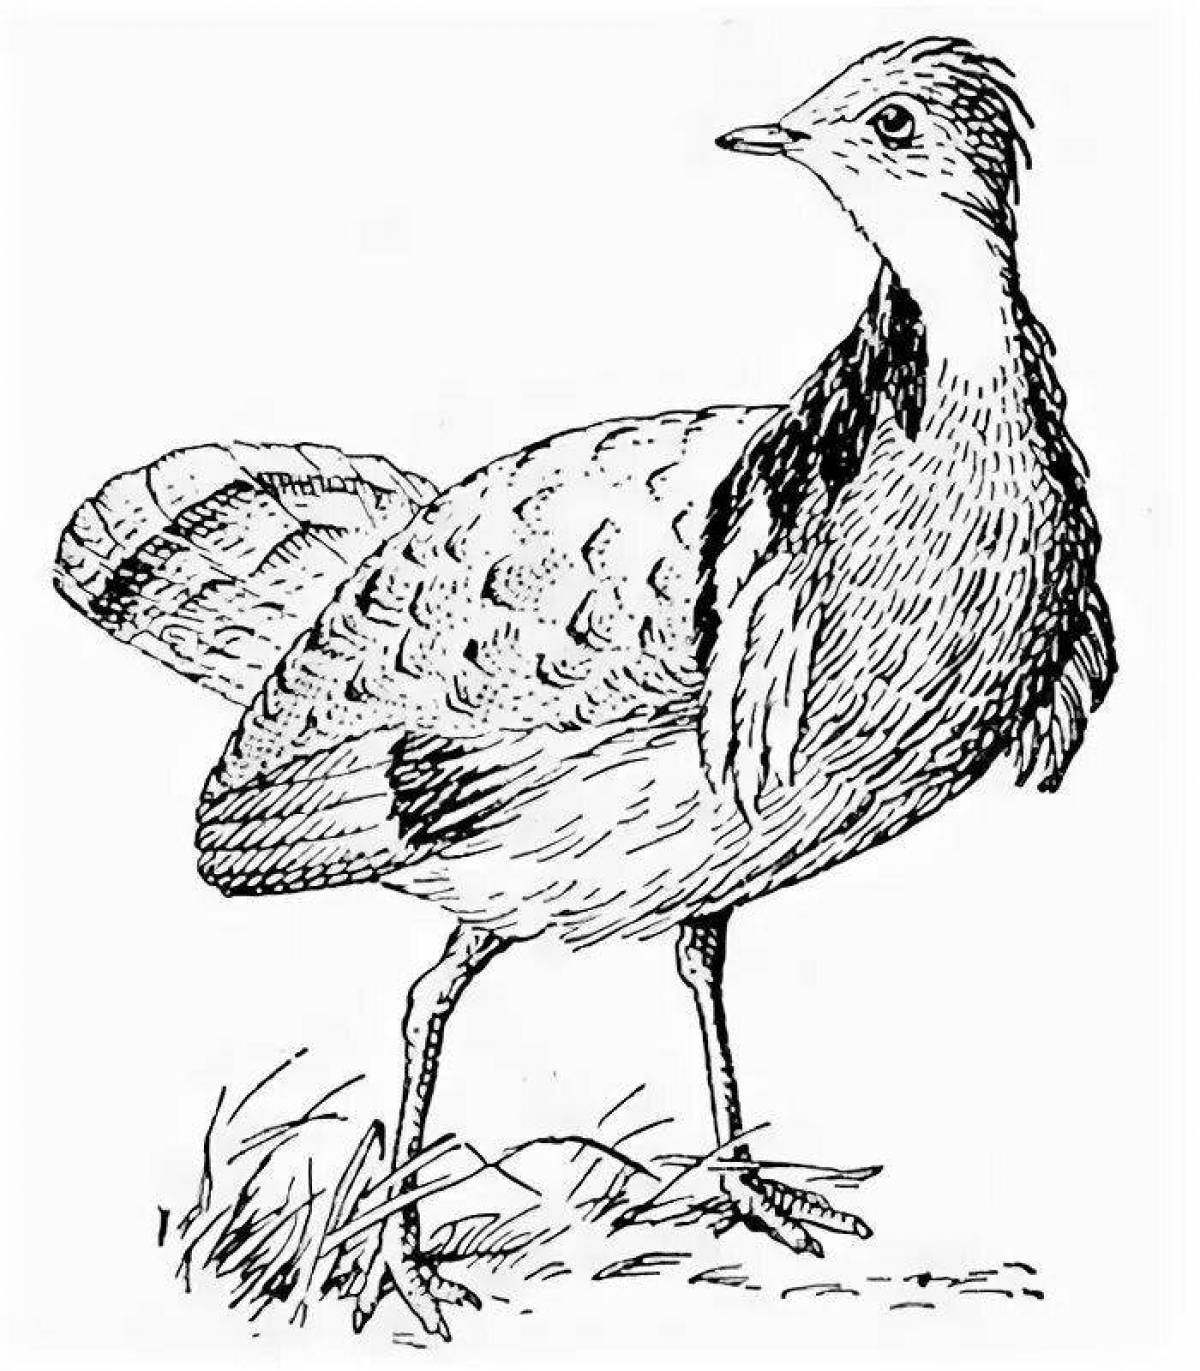 Awesome bustard coloring page